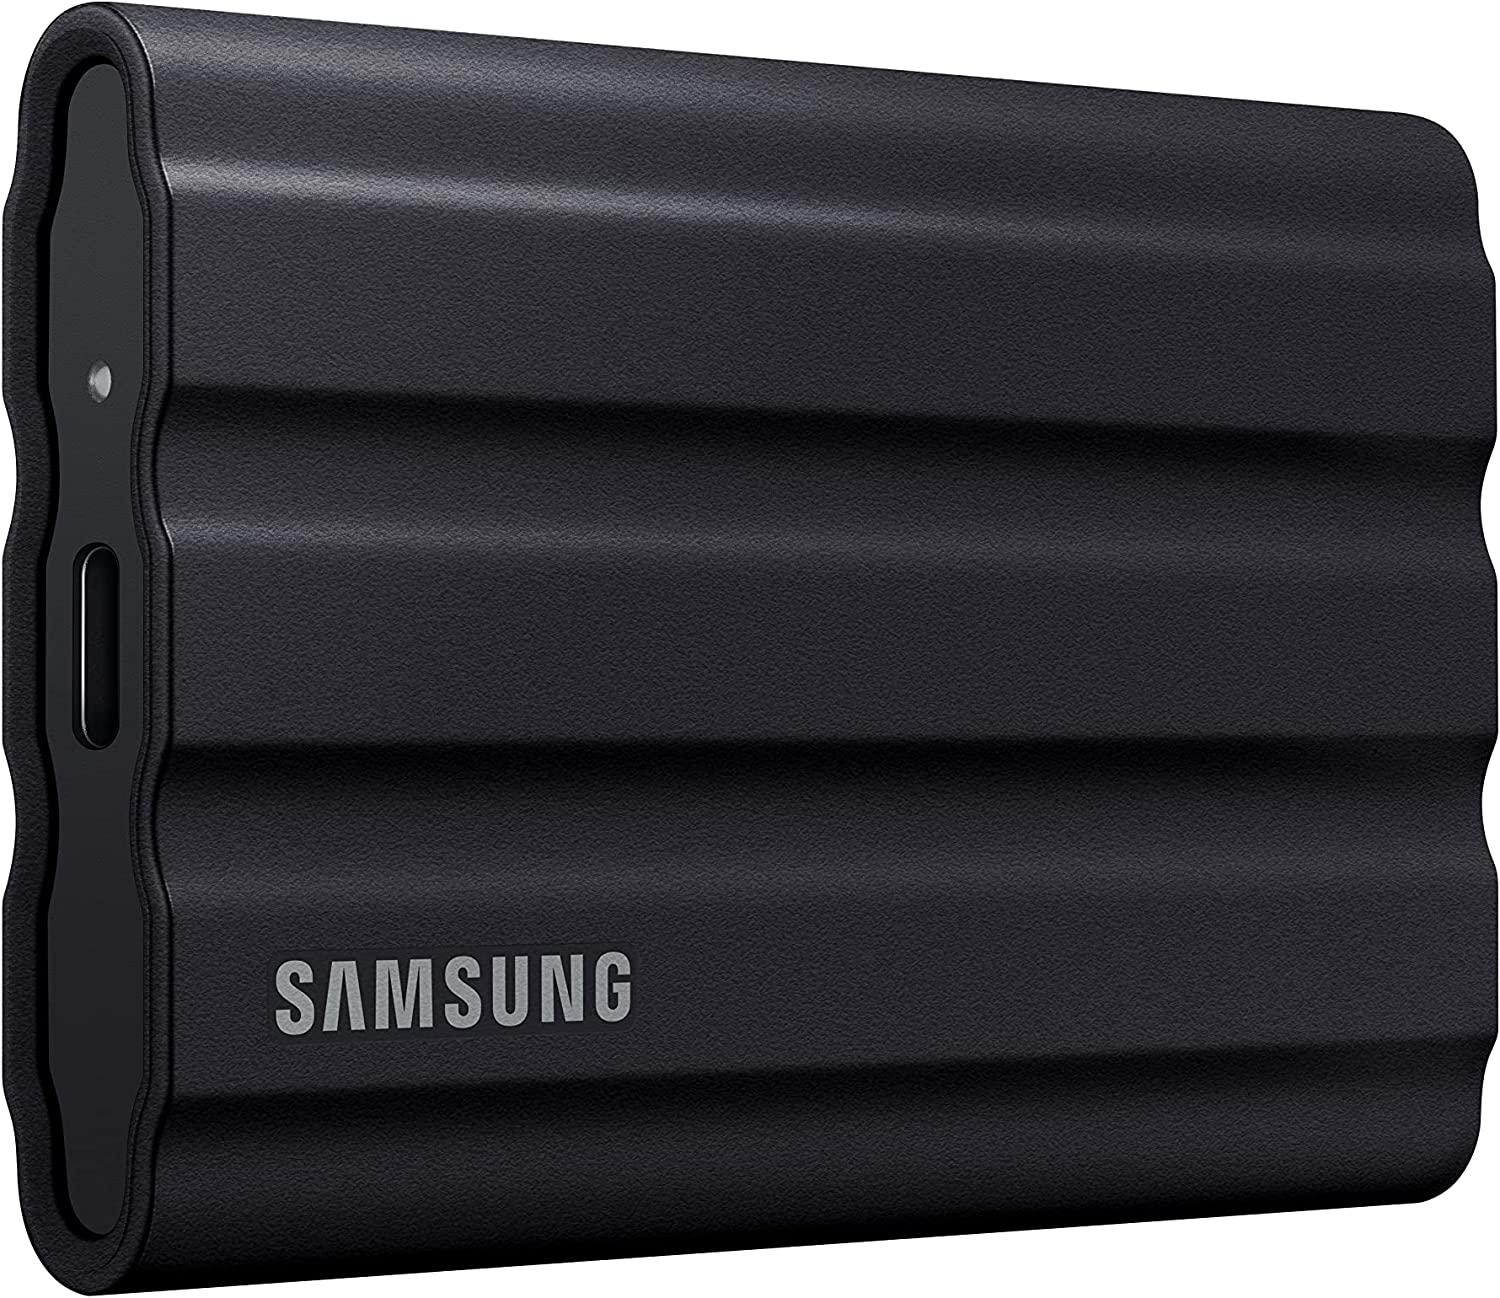 4TB Samsung T7 Shield USB 3.2 Gen2 IP65 SSD Solid State Drive for $199.99 Shipped